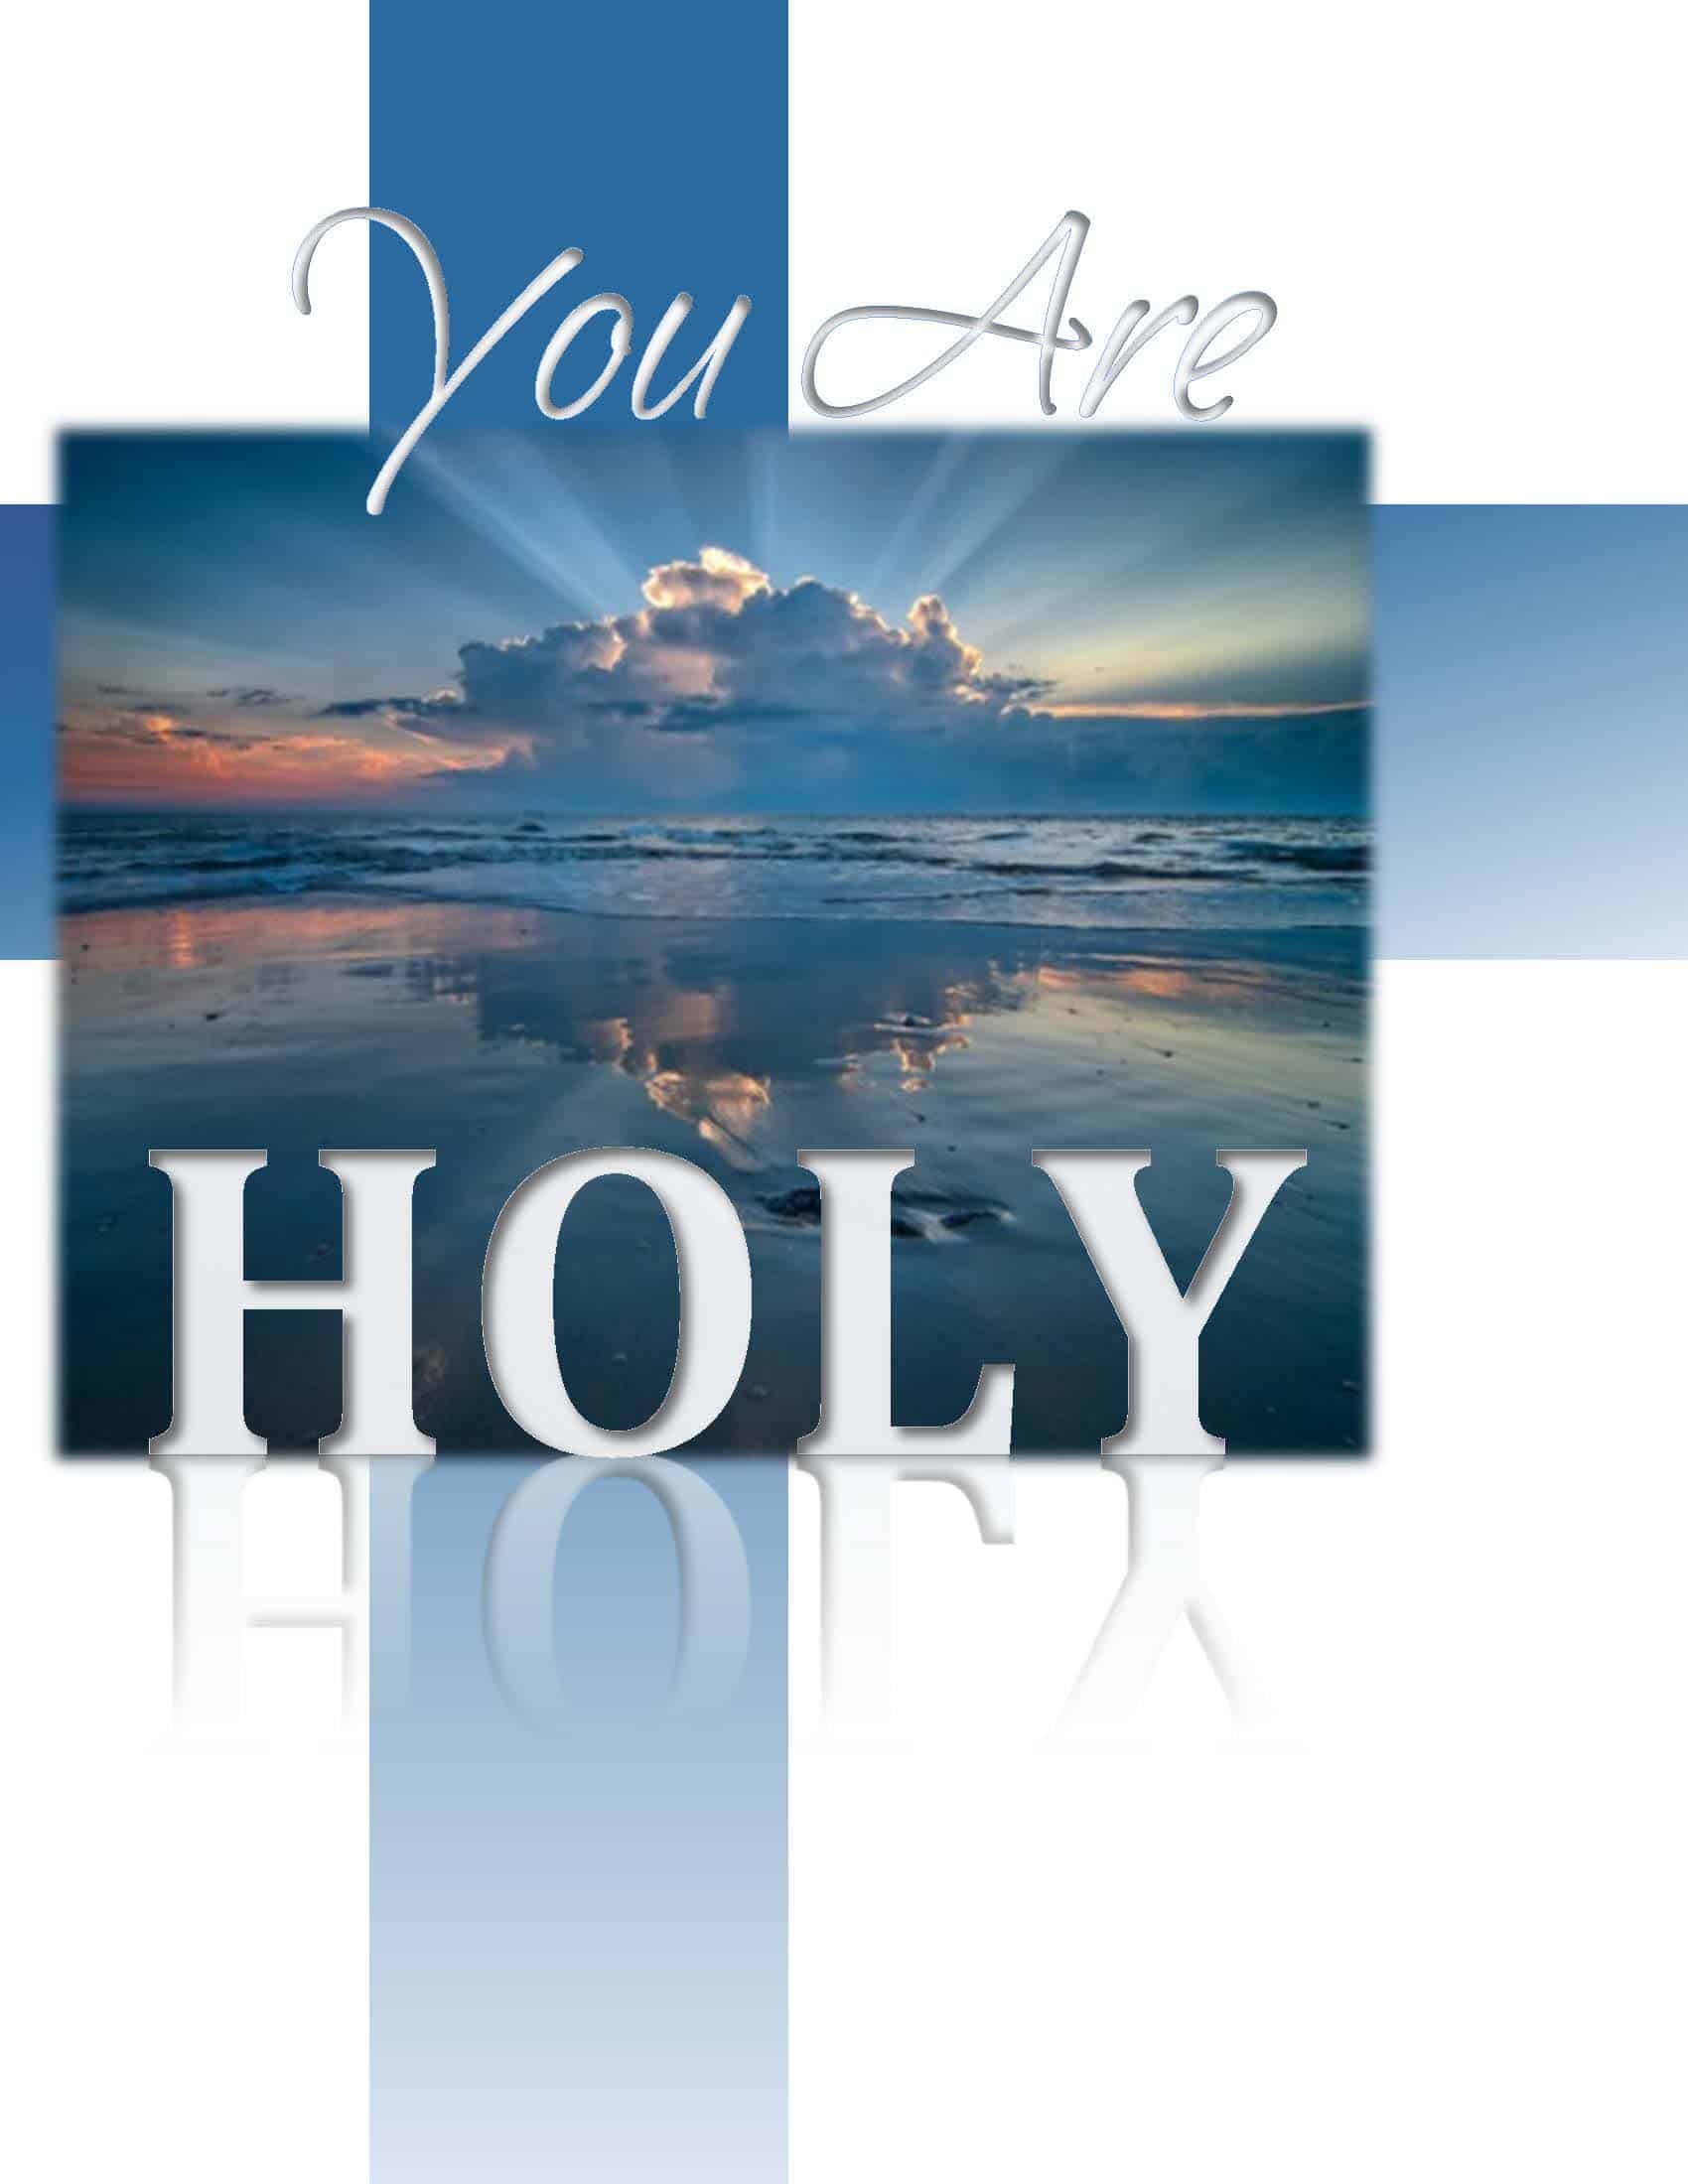 You are Holy 2 cover image